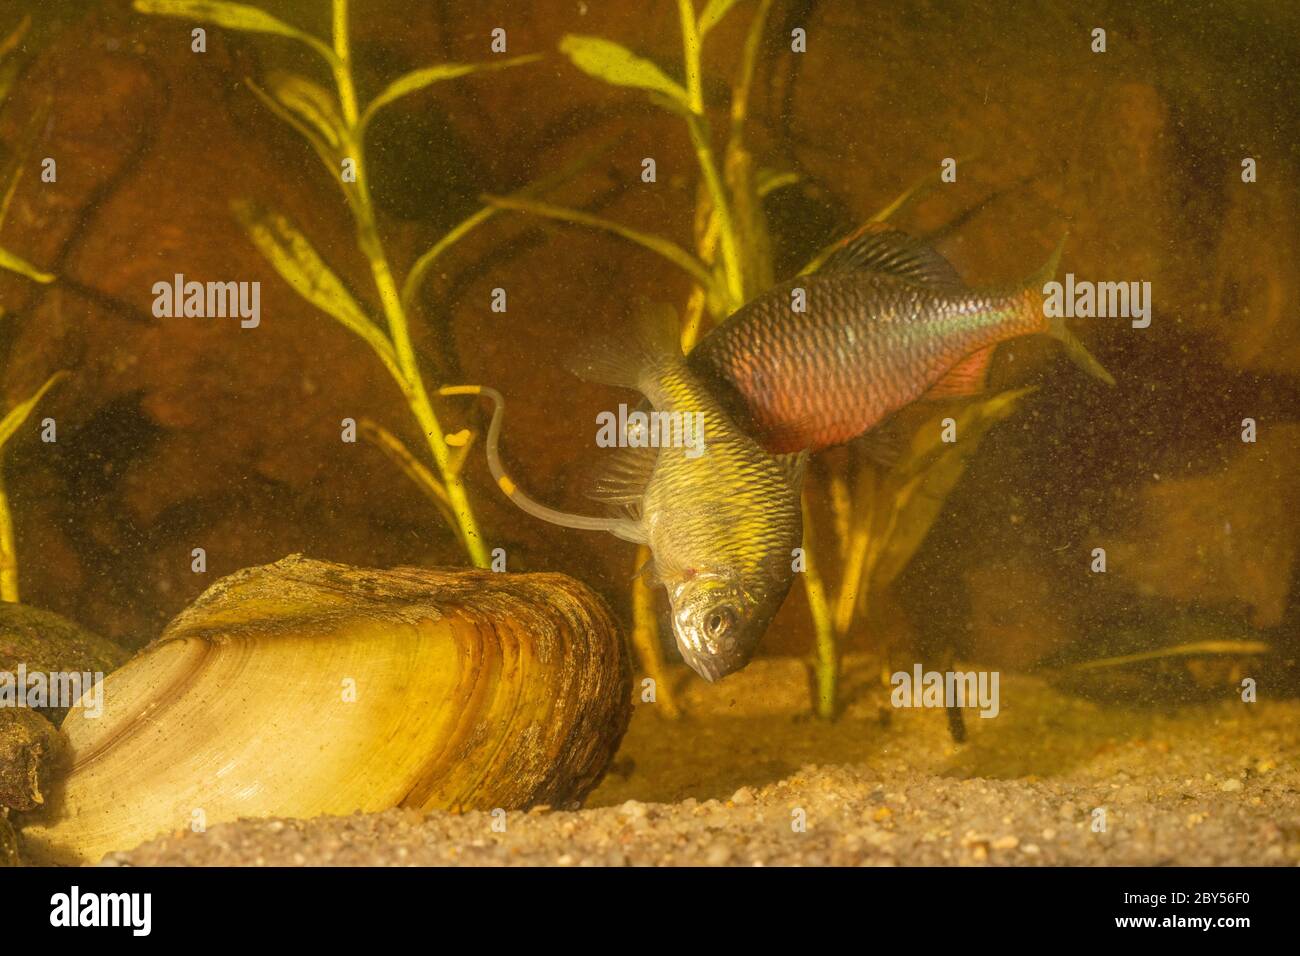 bitterling (Rhodeus amarus, Rhodeus sericeus, Rhodeus sericeus amarus), female with genital papilla in front of a mussel in front and a male with nuptial colouration, Germany Stock Photo